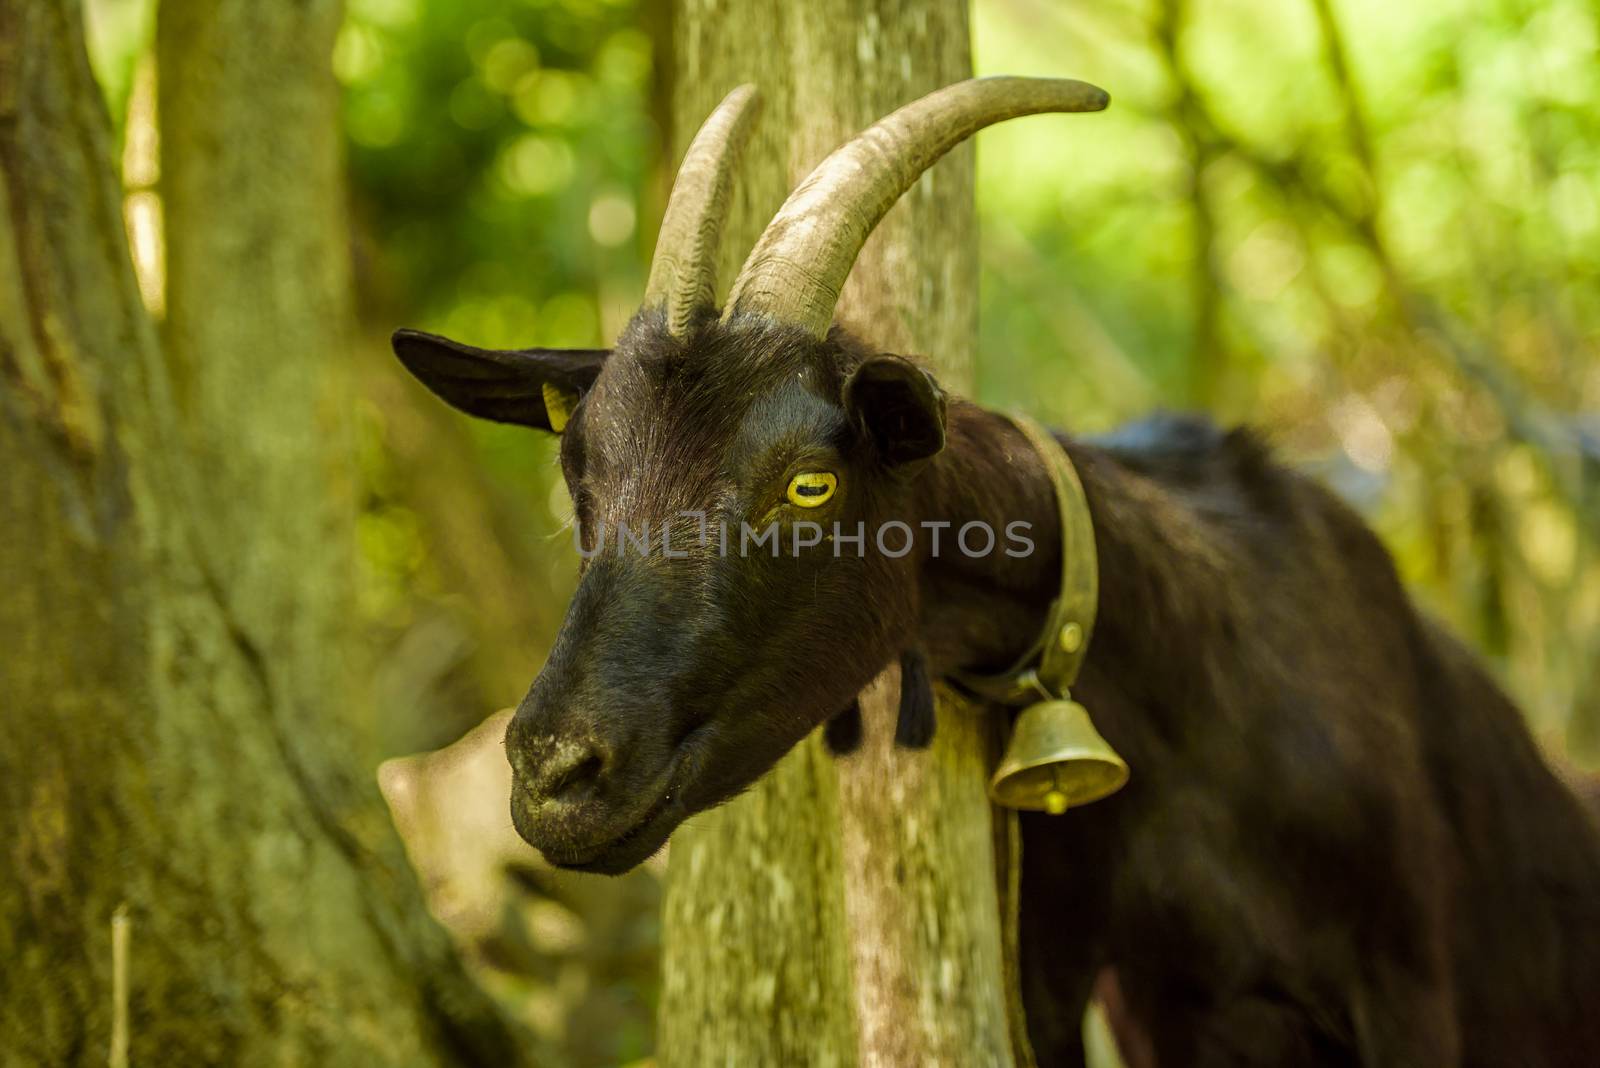 Picture taken in an orchard from a swiss village, with a people friendly black goat